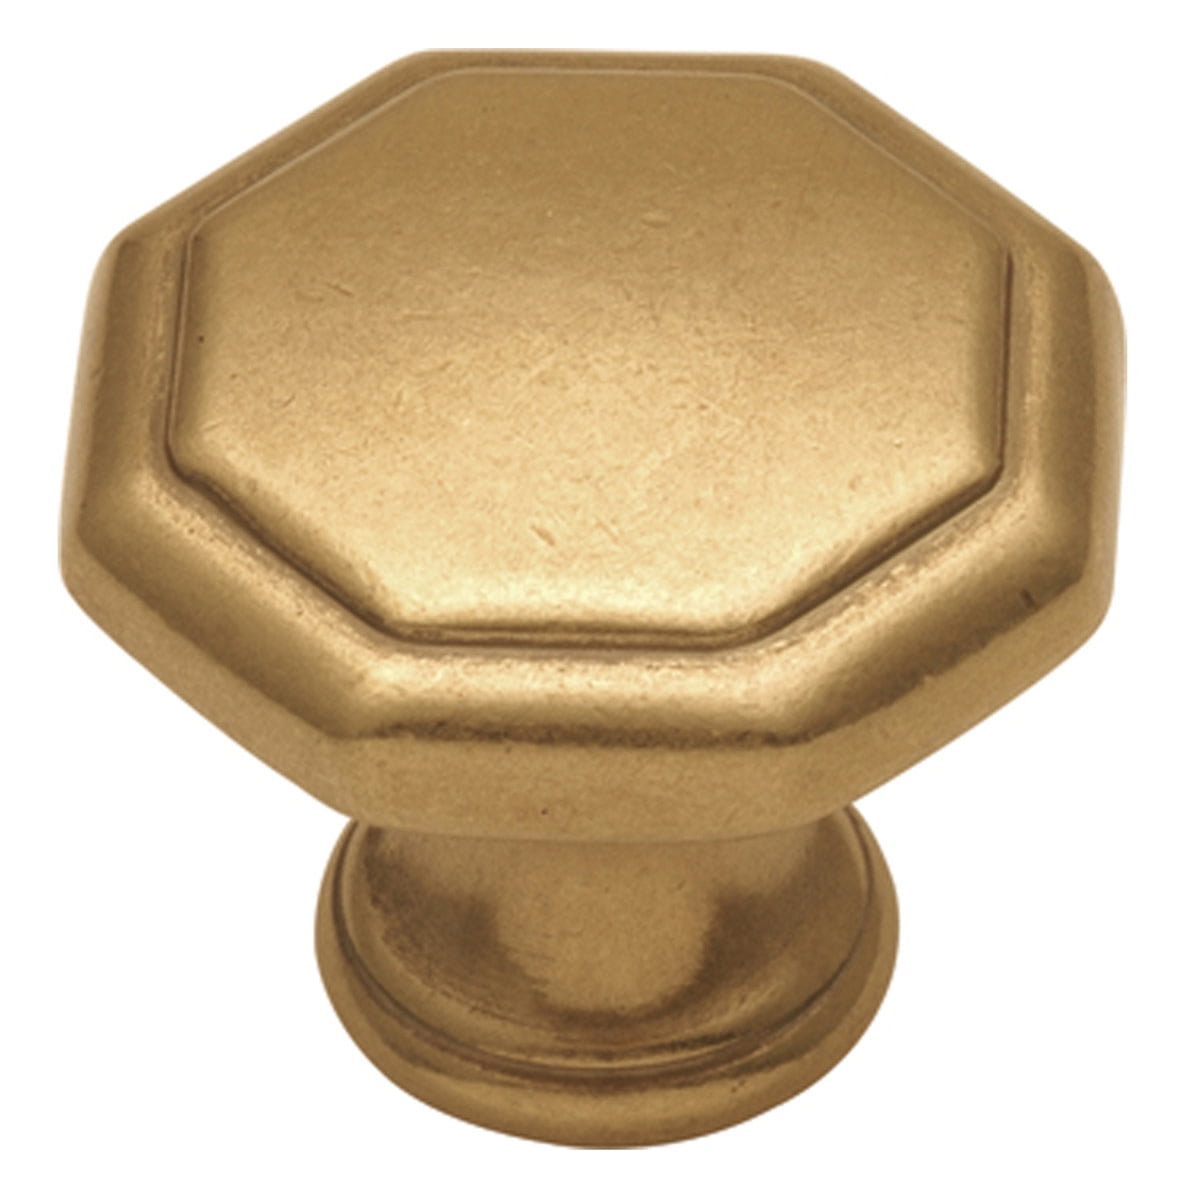 Polished Brass Hickory Hardware P14402-3 1-1/8-Inch Conquest Cabinet Knob 